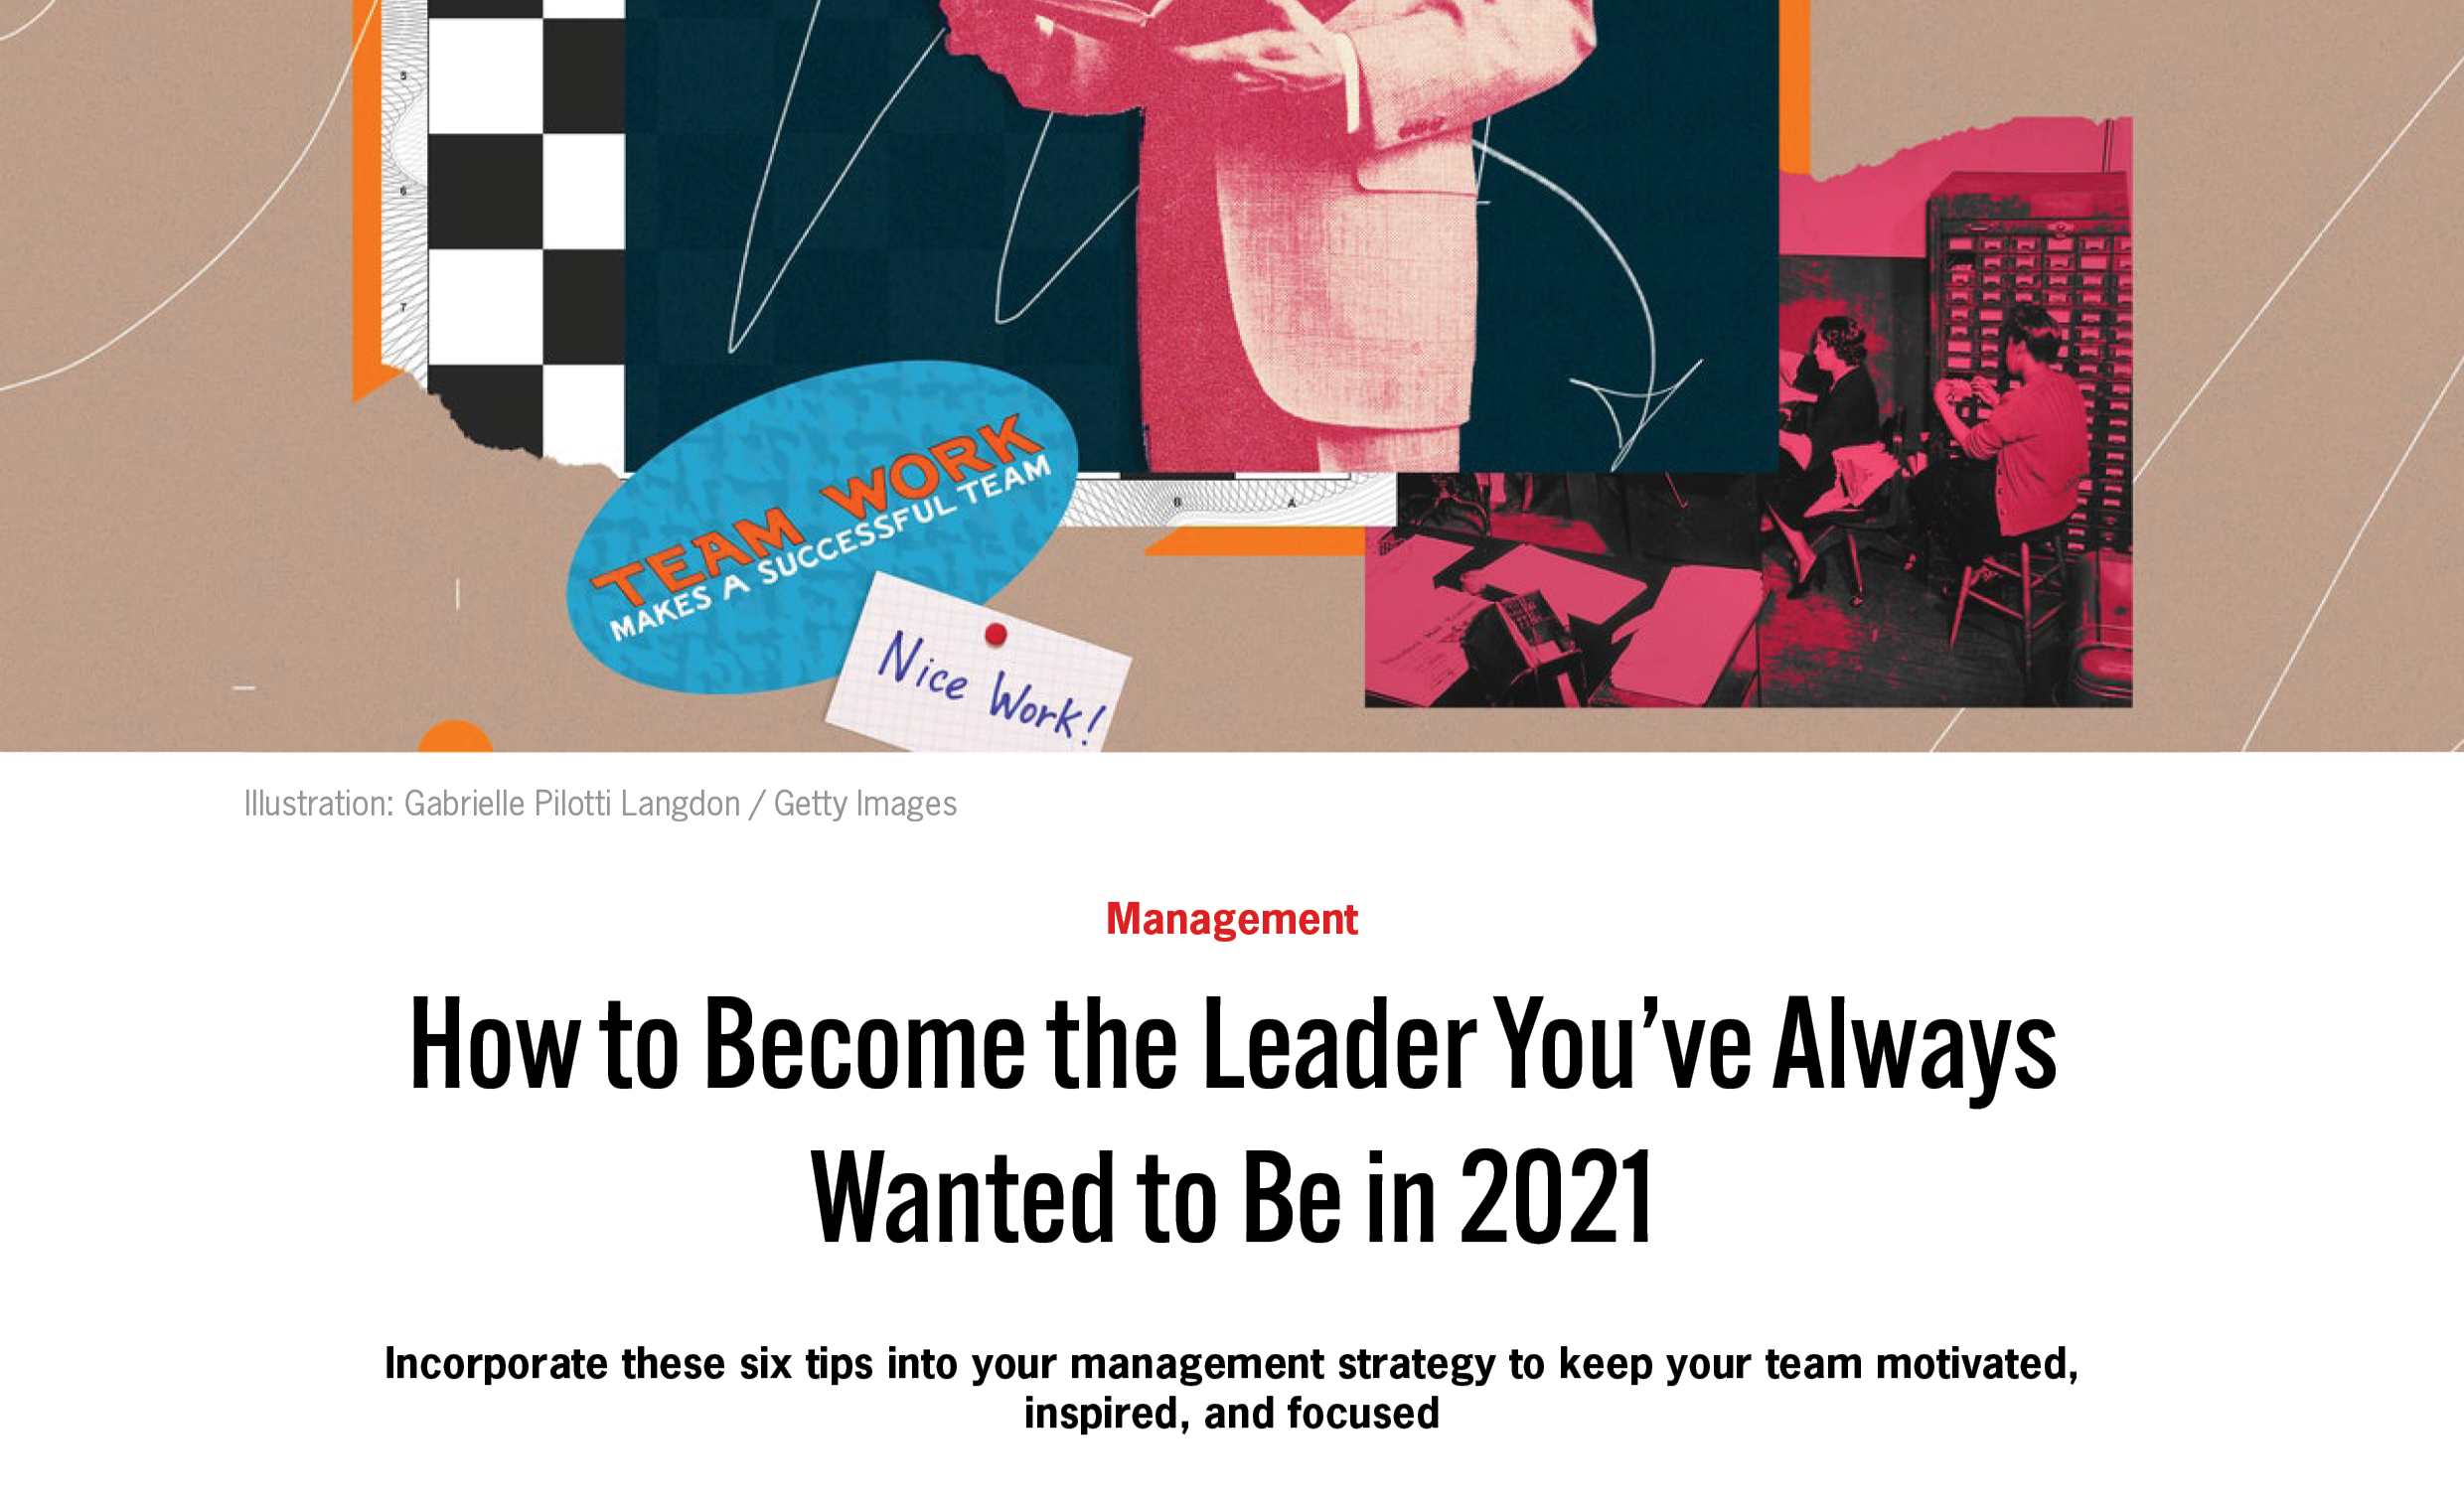 How to Become the Leader You’ve Always Wanted | Architectural Digest